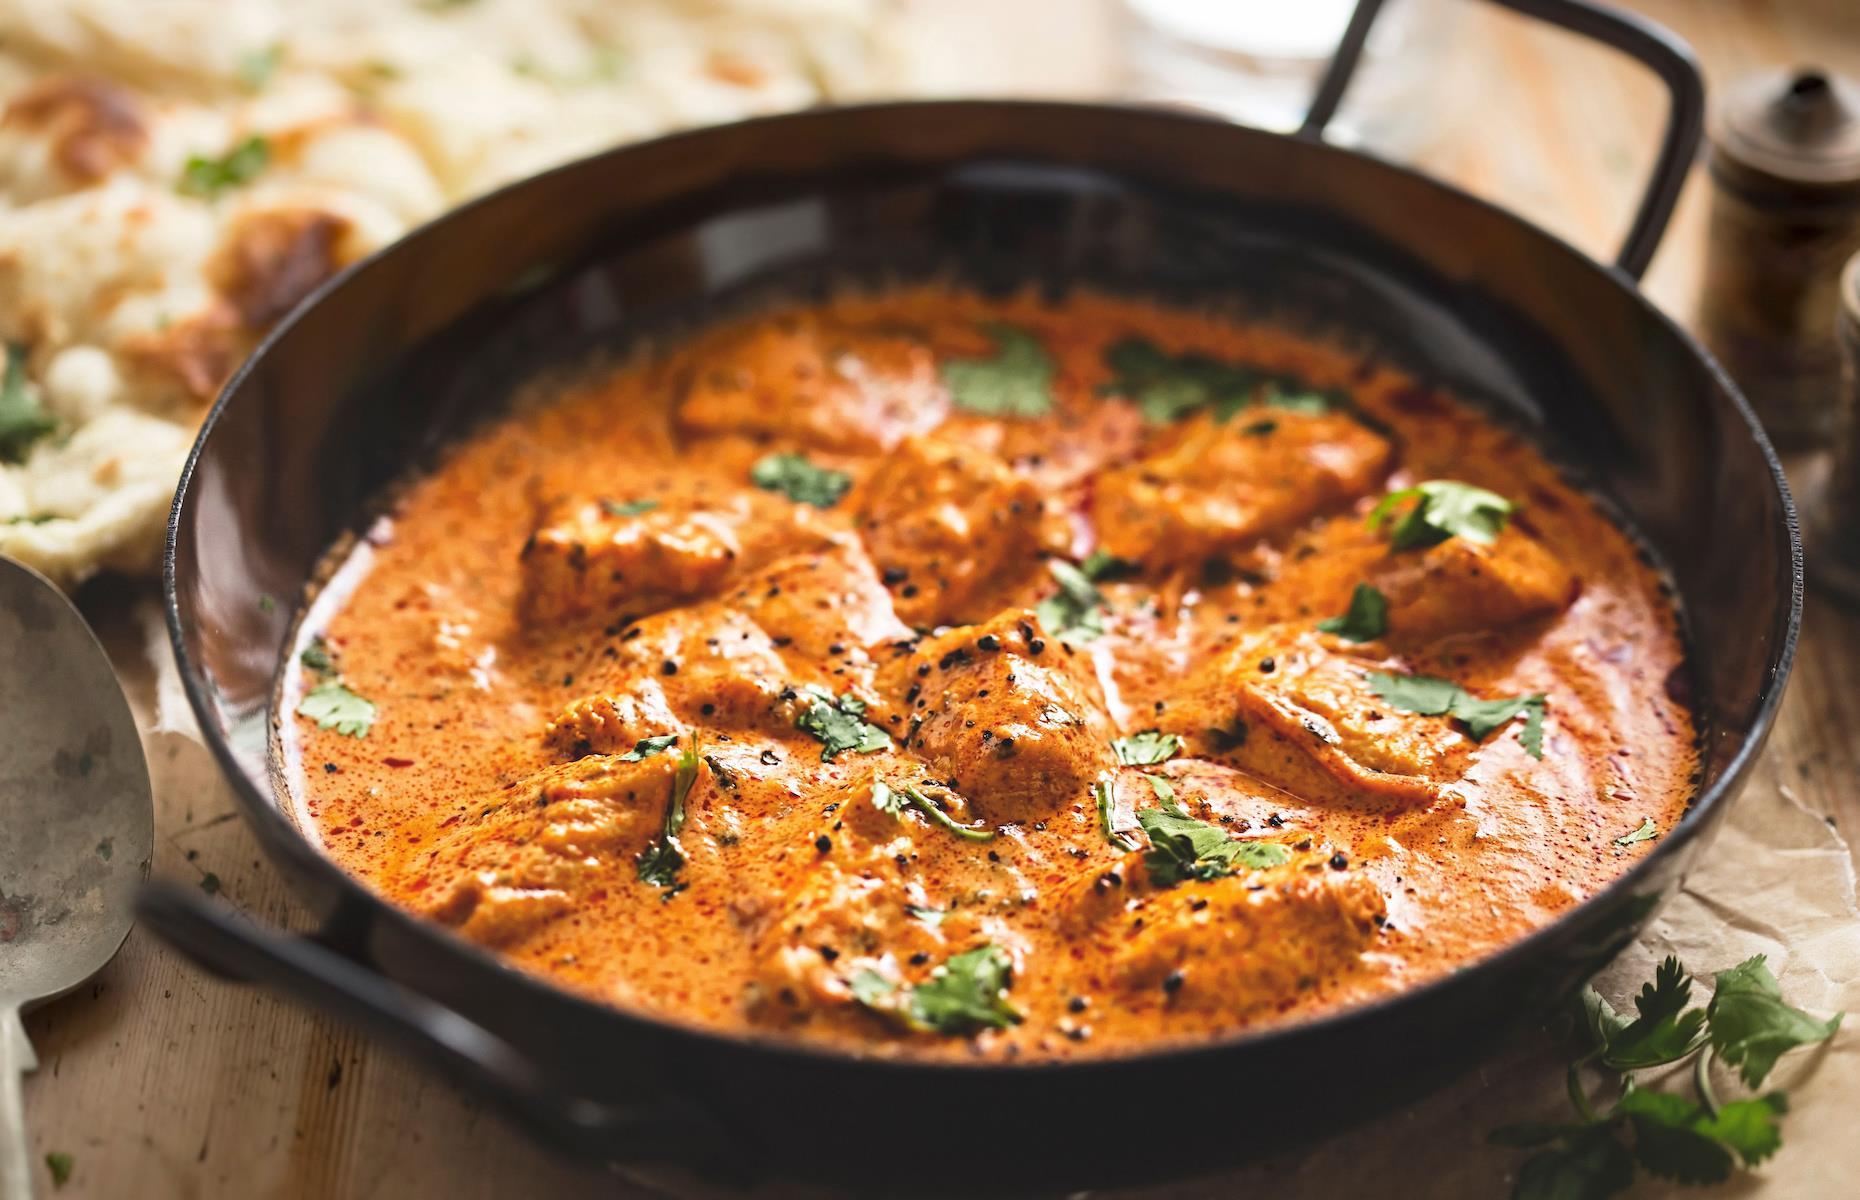 The World's 29 Best Curry Dishes Most Americans Don't Know